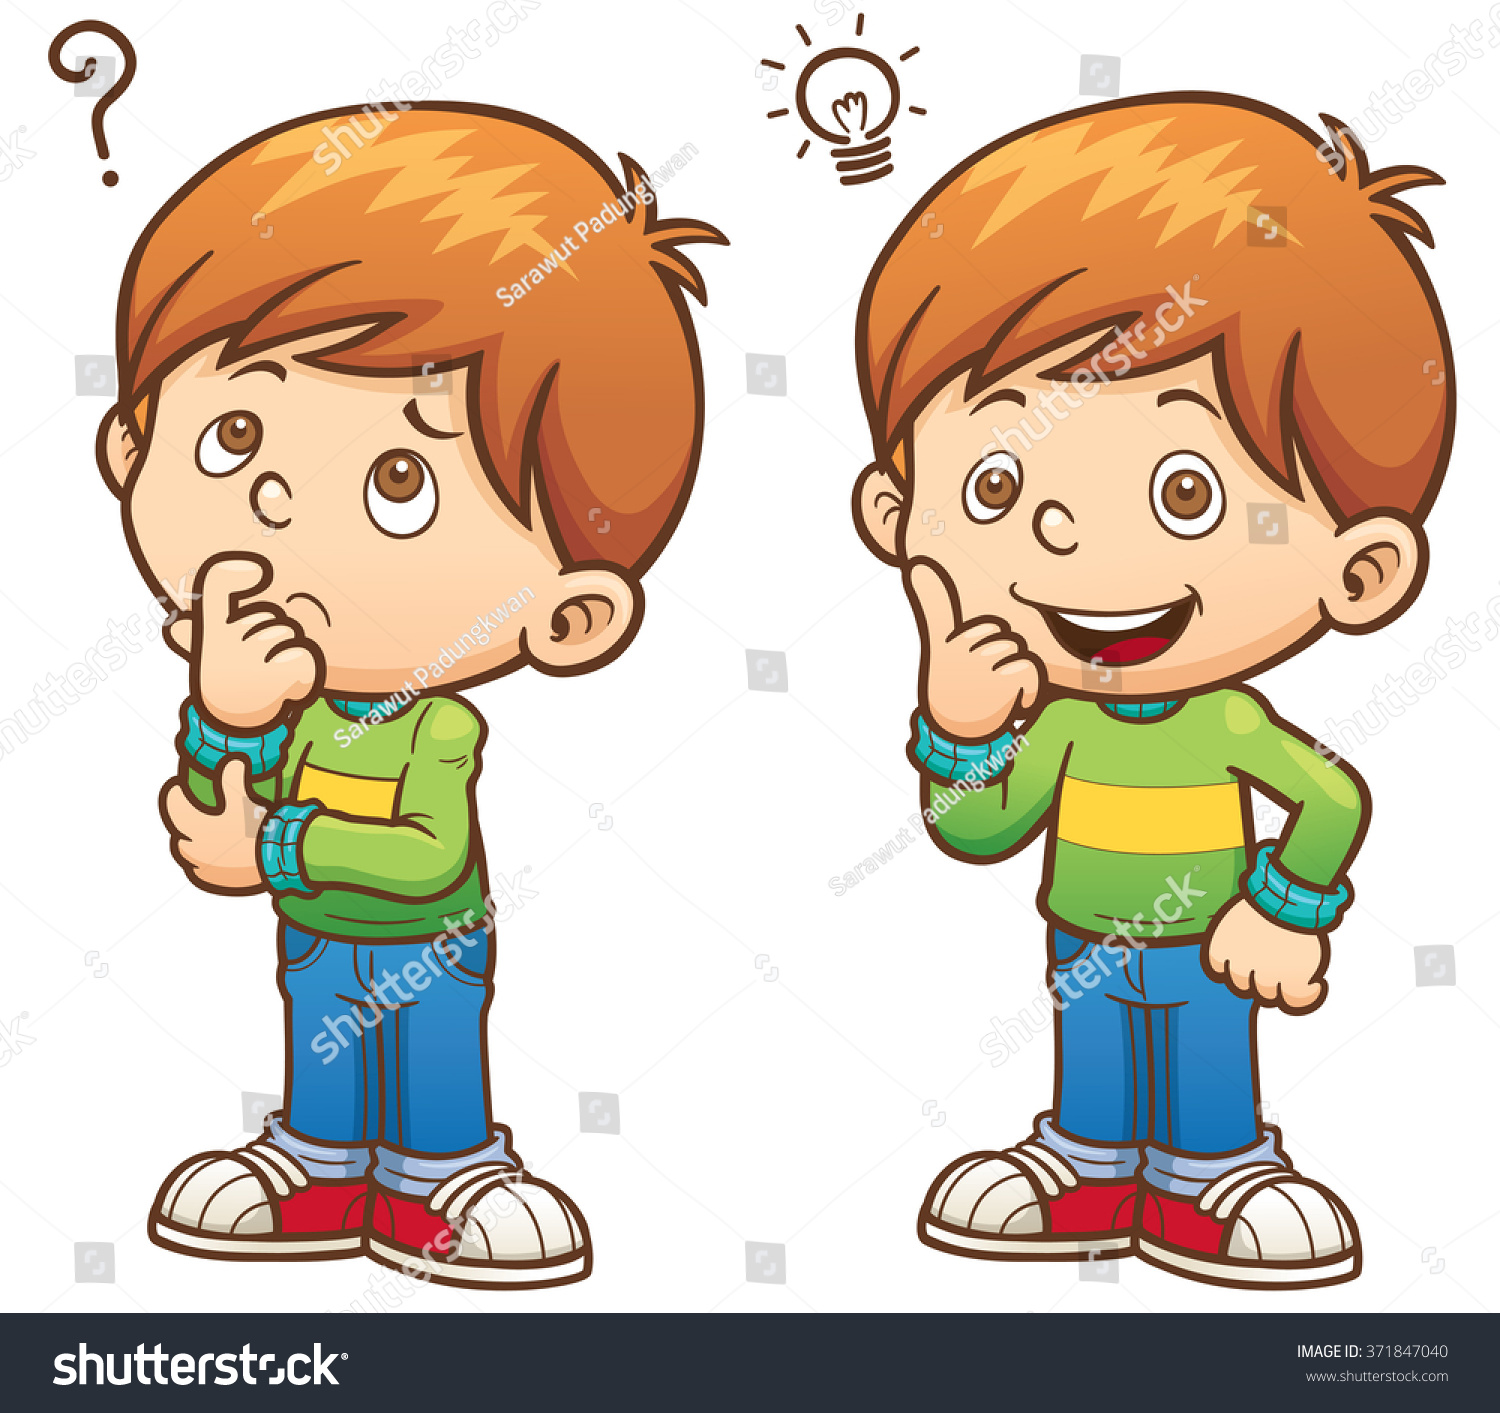 Image result for cartoon of boy happy and thinking